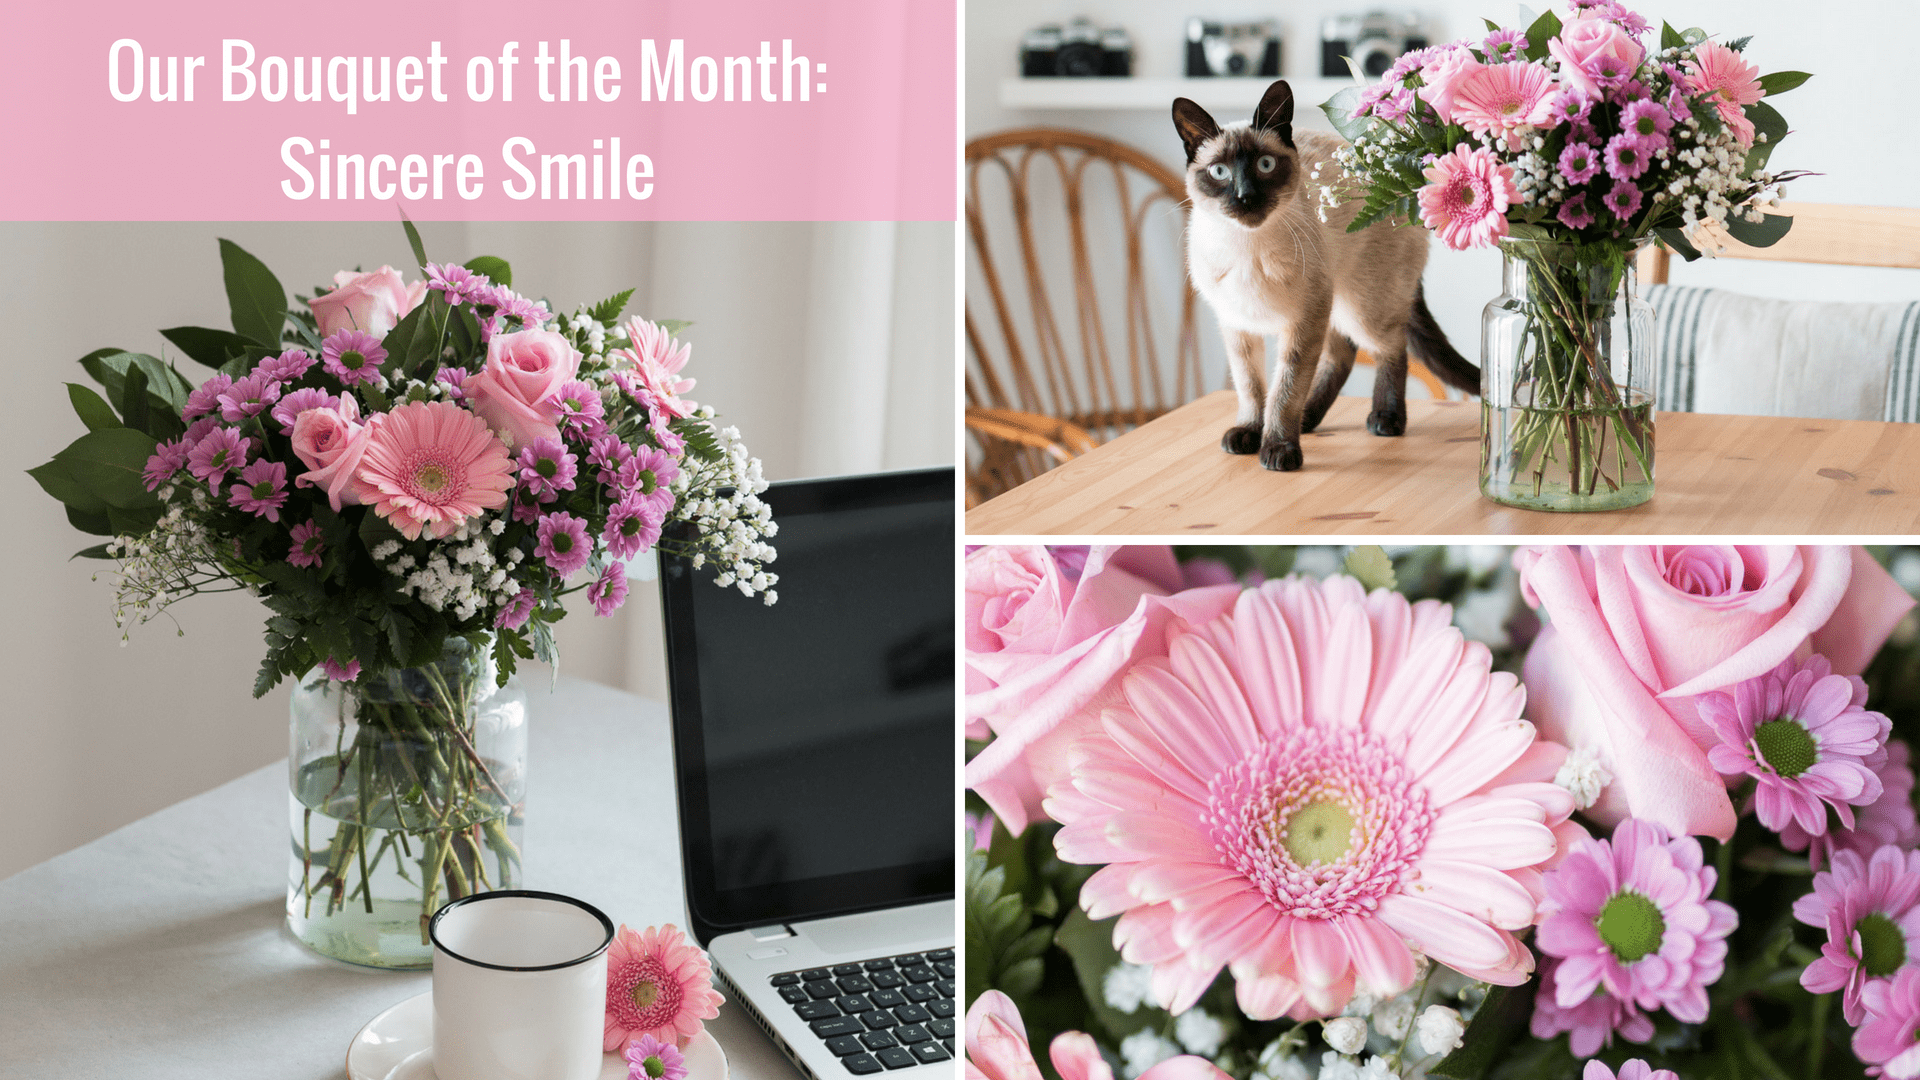 Our Bouquet of the Month Sincere Smile min FloraQueen EN Our Bouquet of the Month: Sincere Smile